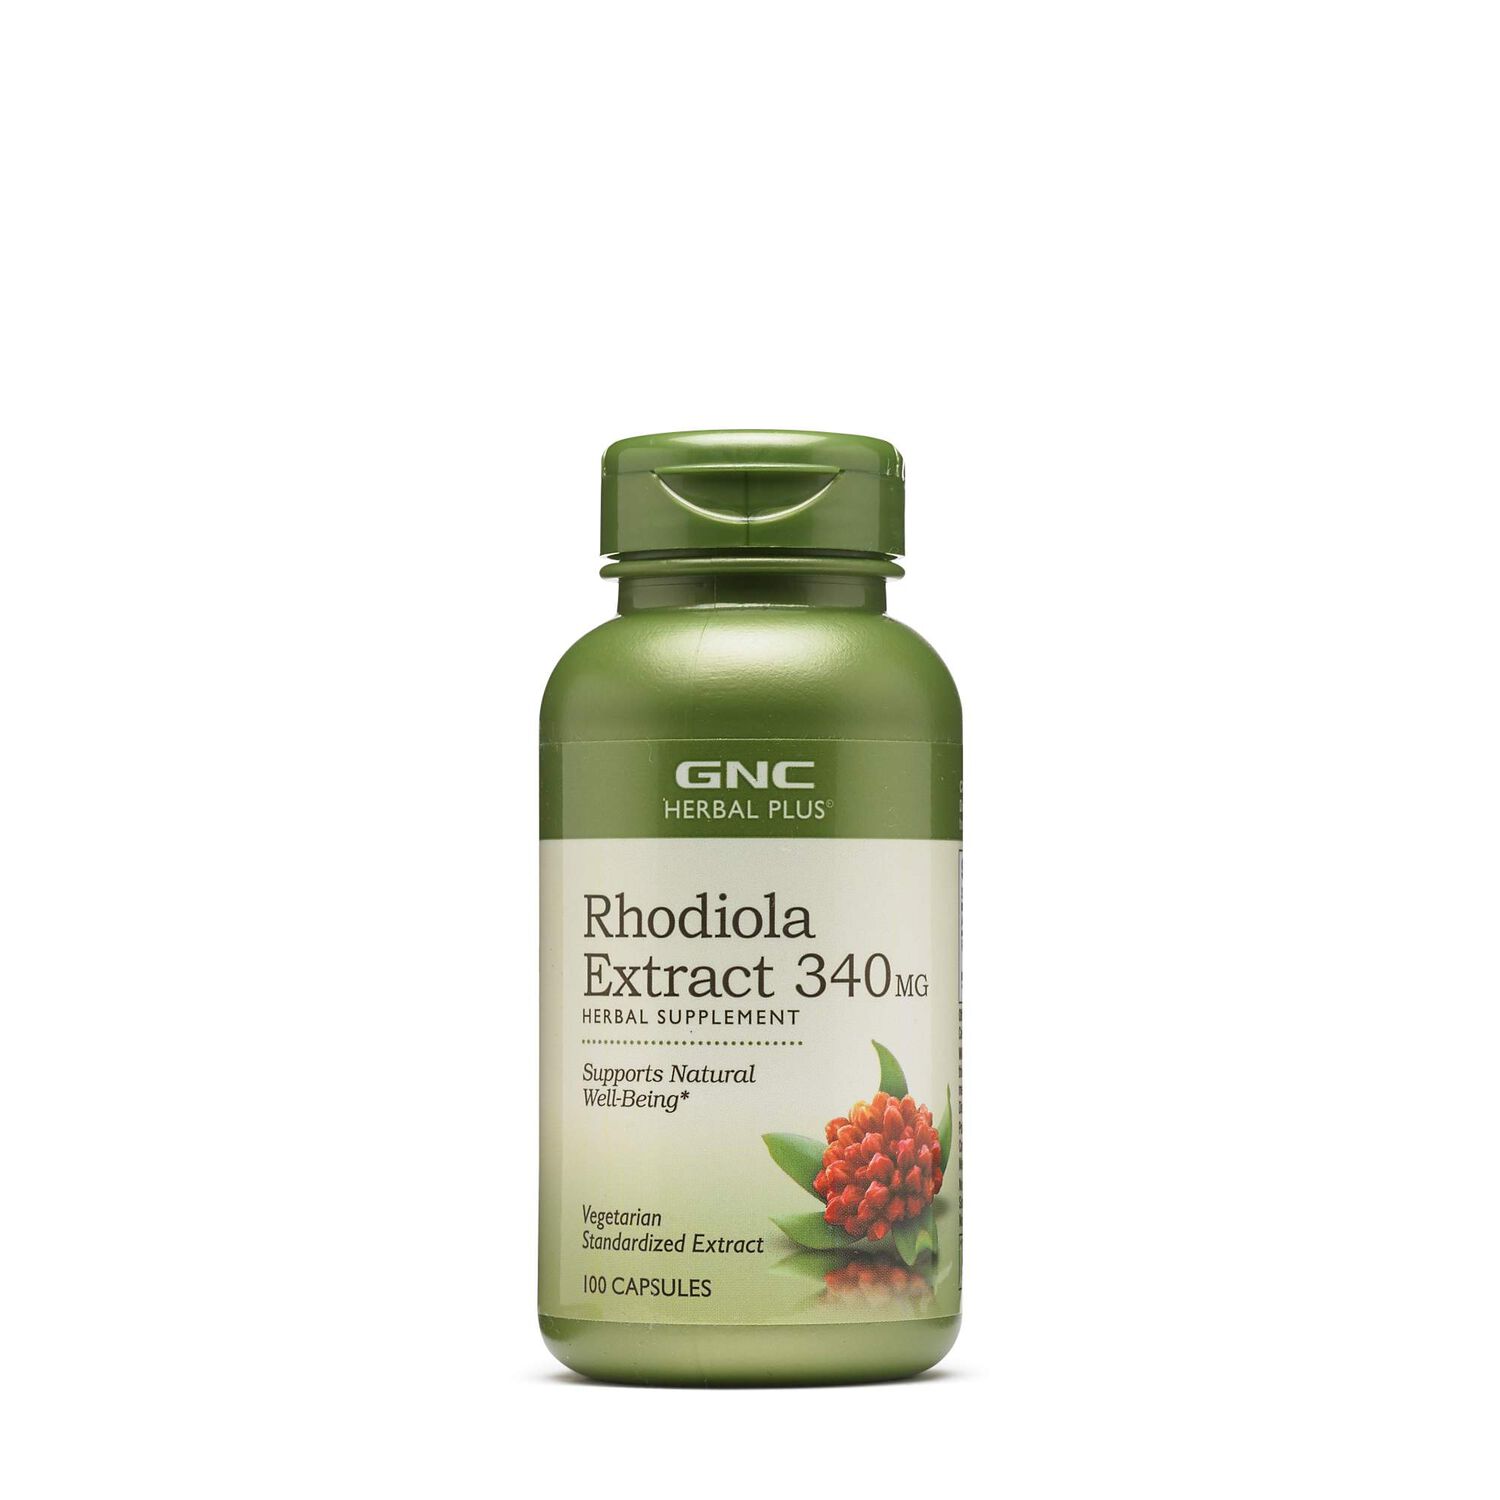 Rhodiola Extract 340 mg - 100 Capsules (100 Servings)